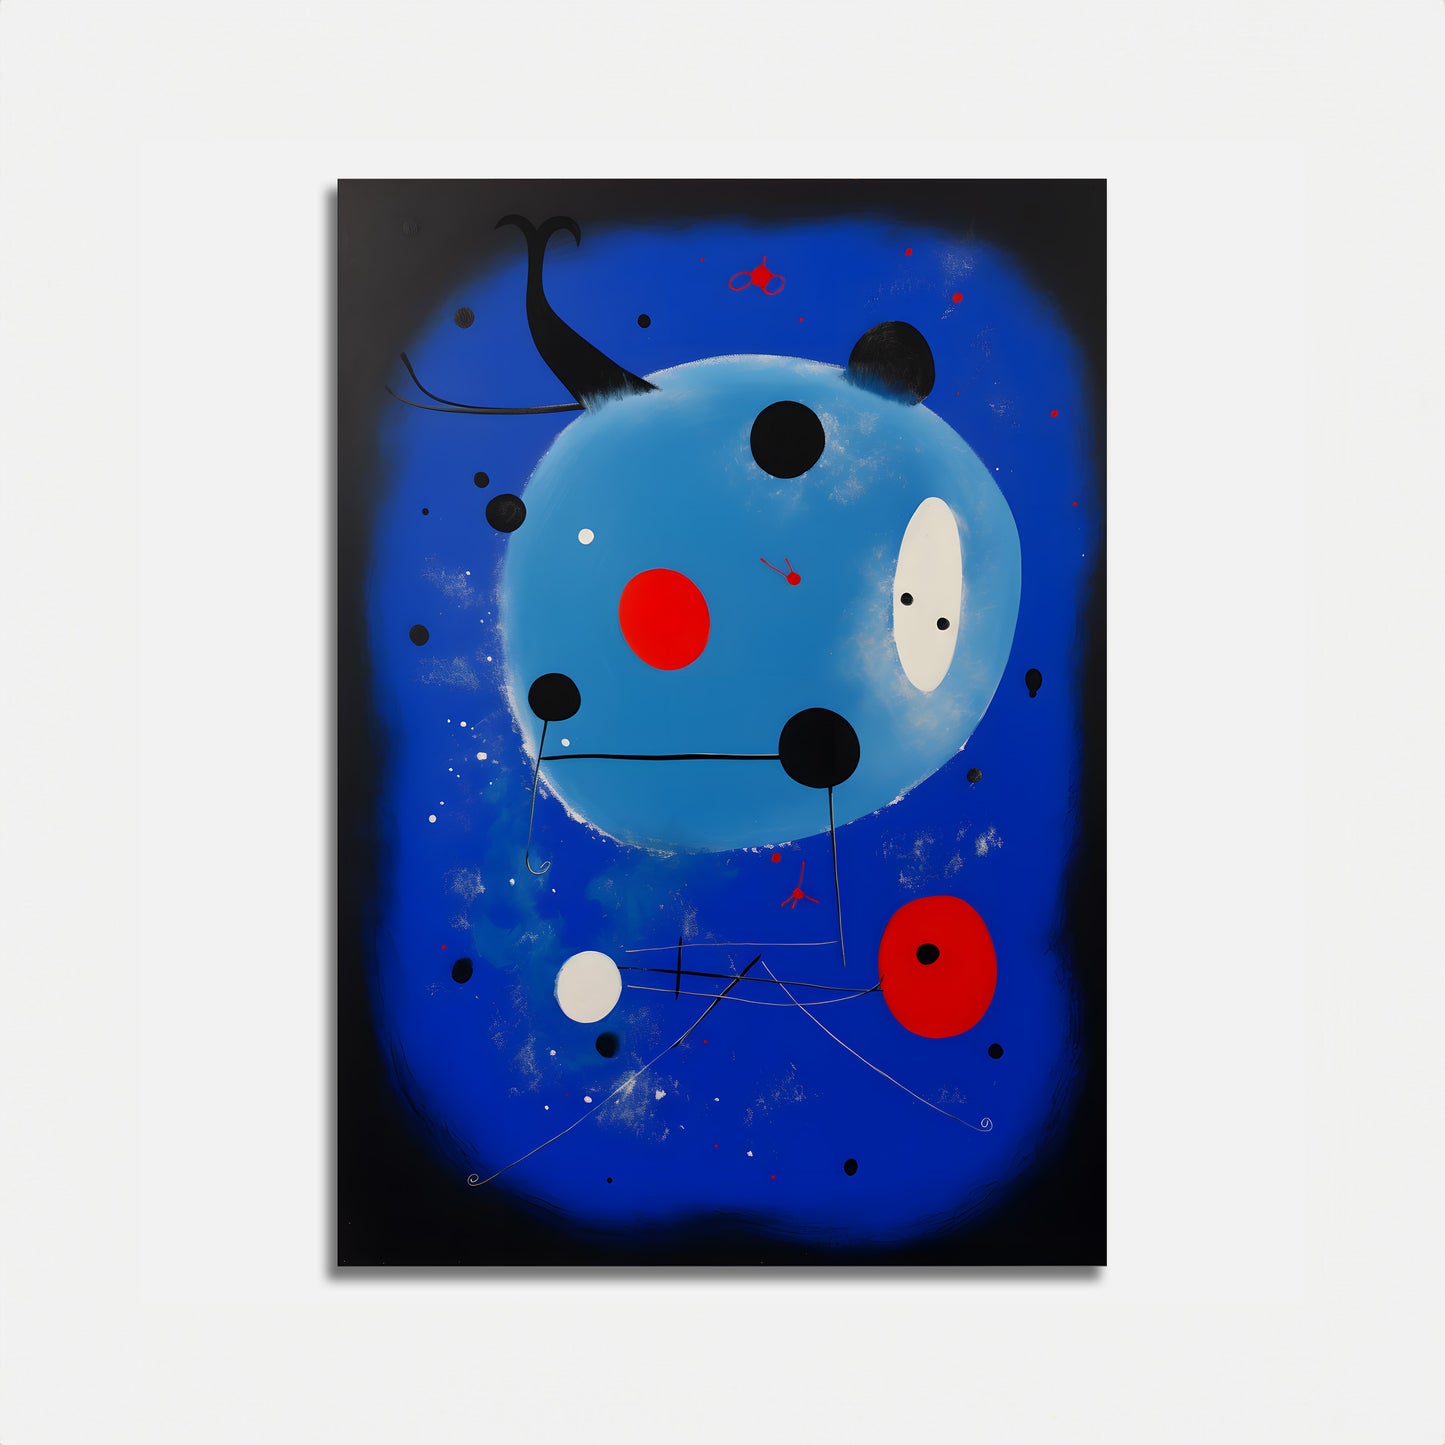 Abstract painting with blue background and whimsical circles resembling a panda in space.